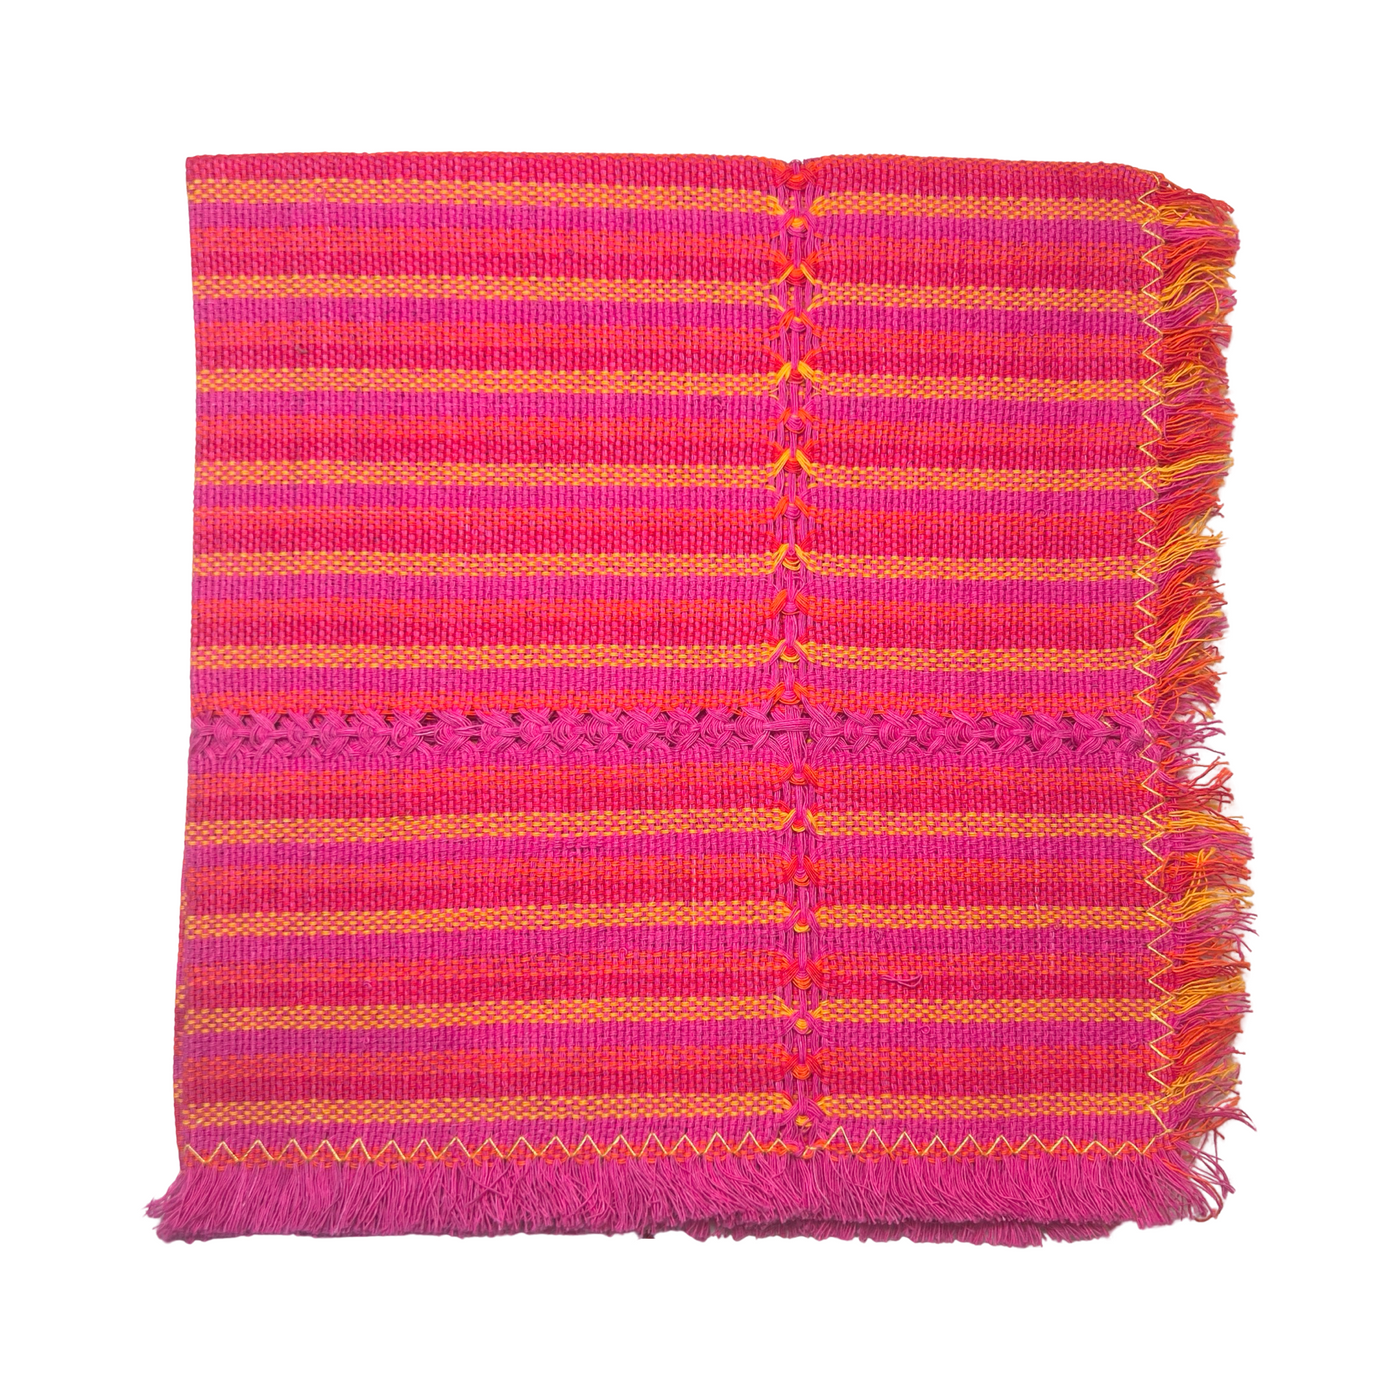 pink and orange striped handwoven napkin folded in quarters